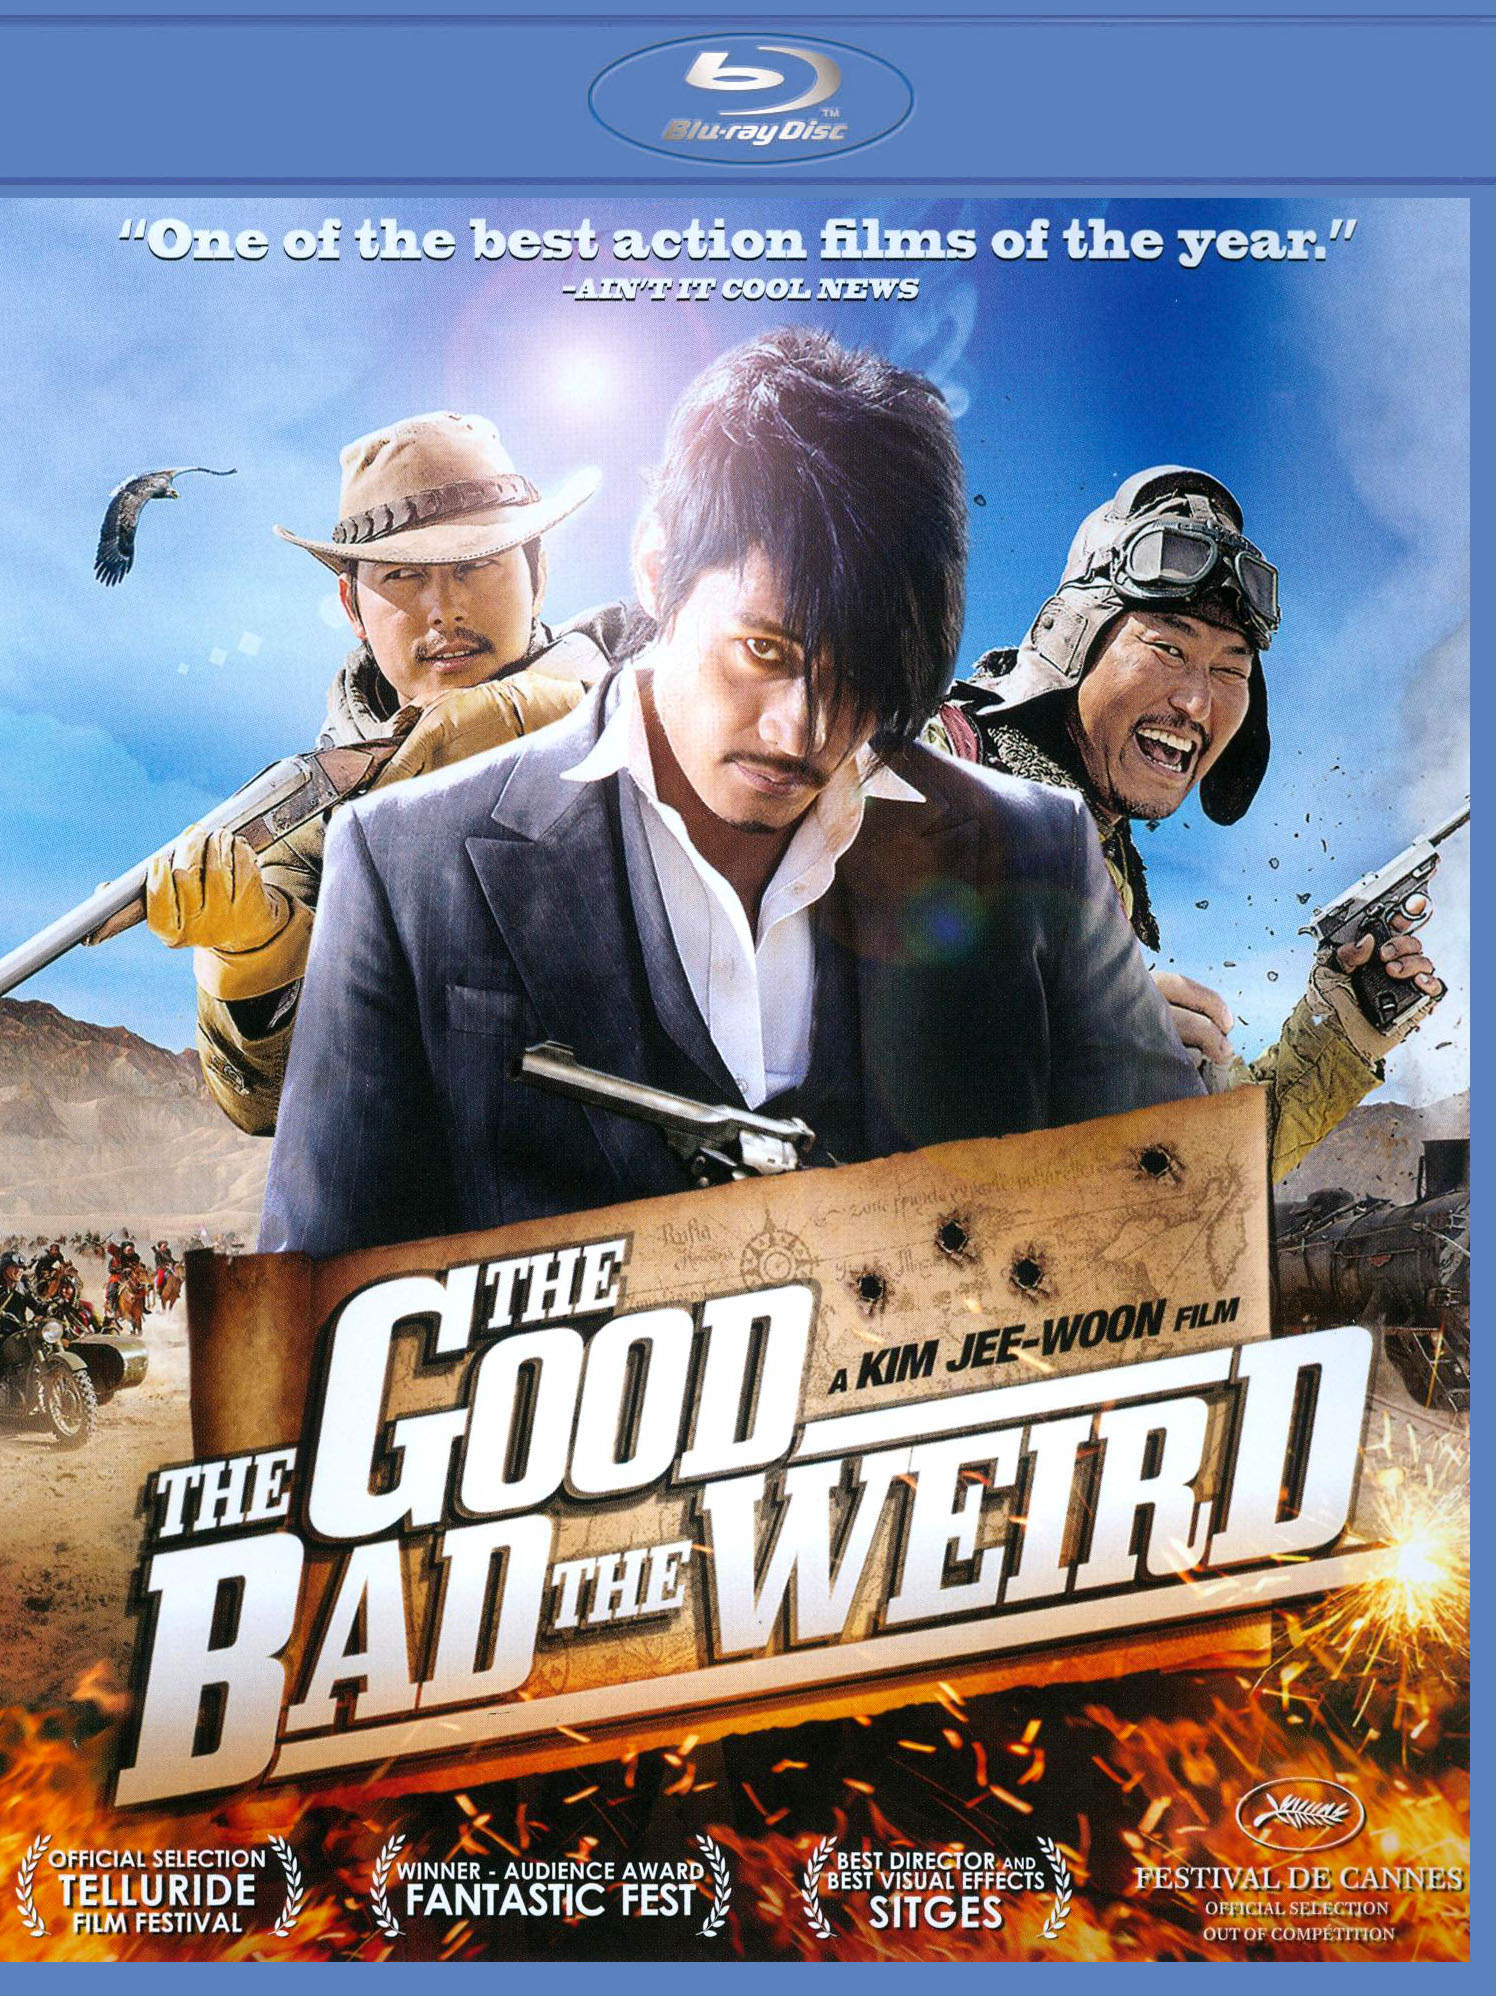 The Good, the Bad, the Weird [Blu-ray] [2008] - Best Buy